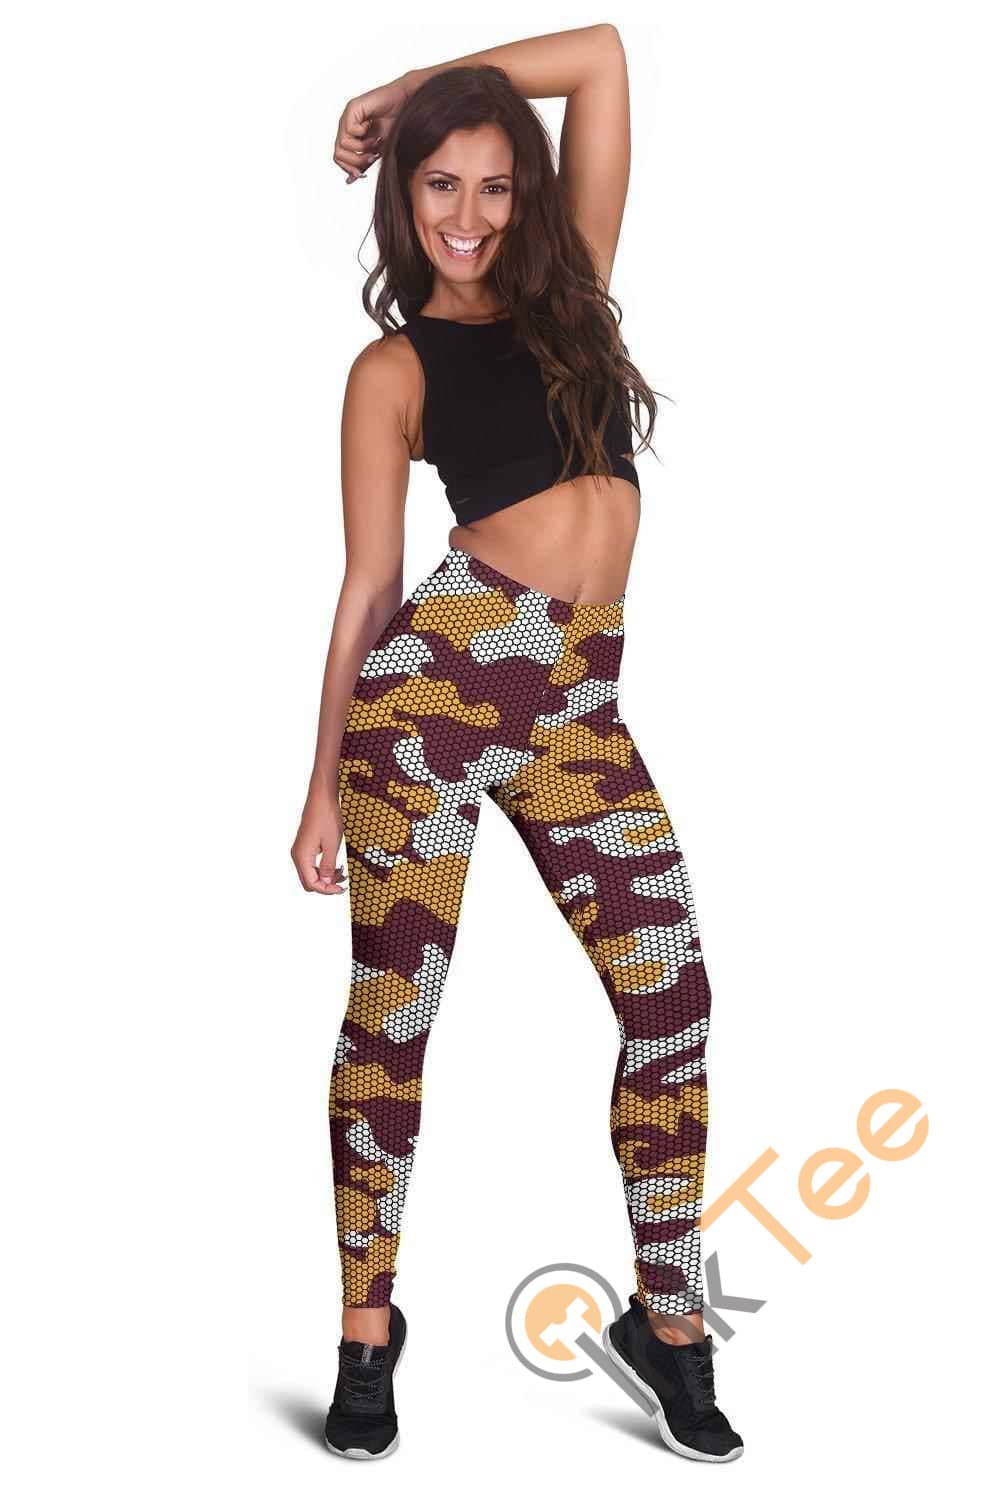 Inktee Store - Washington Redskins Inspired Hex Camo 3D All Over Print For Yoga Fitness Fashion Women'S Leggings Image